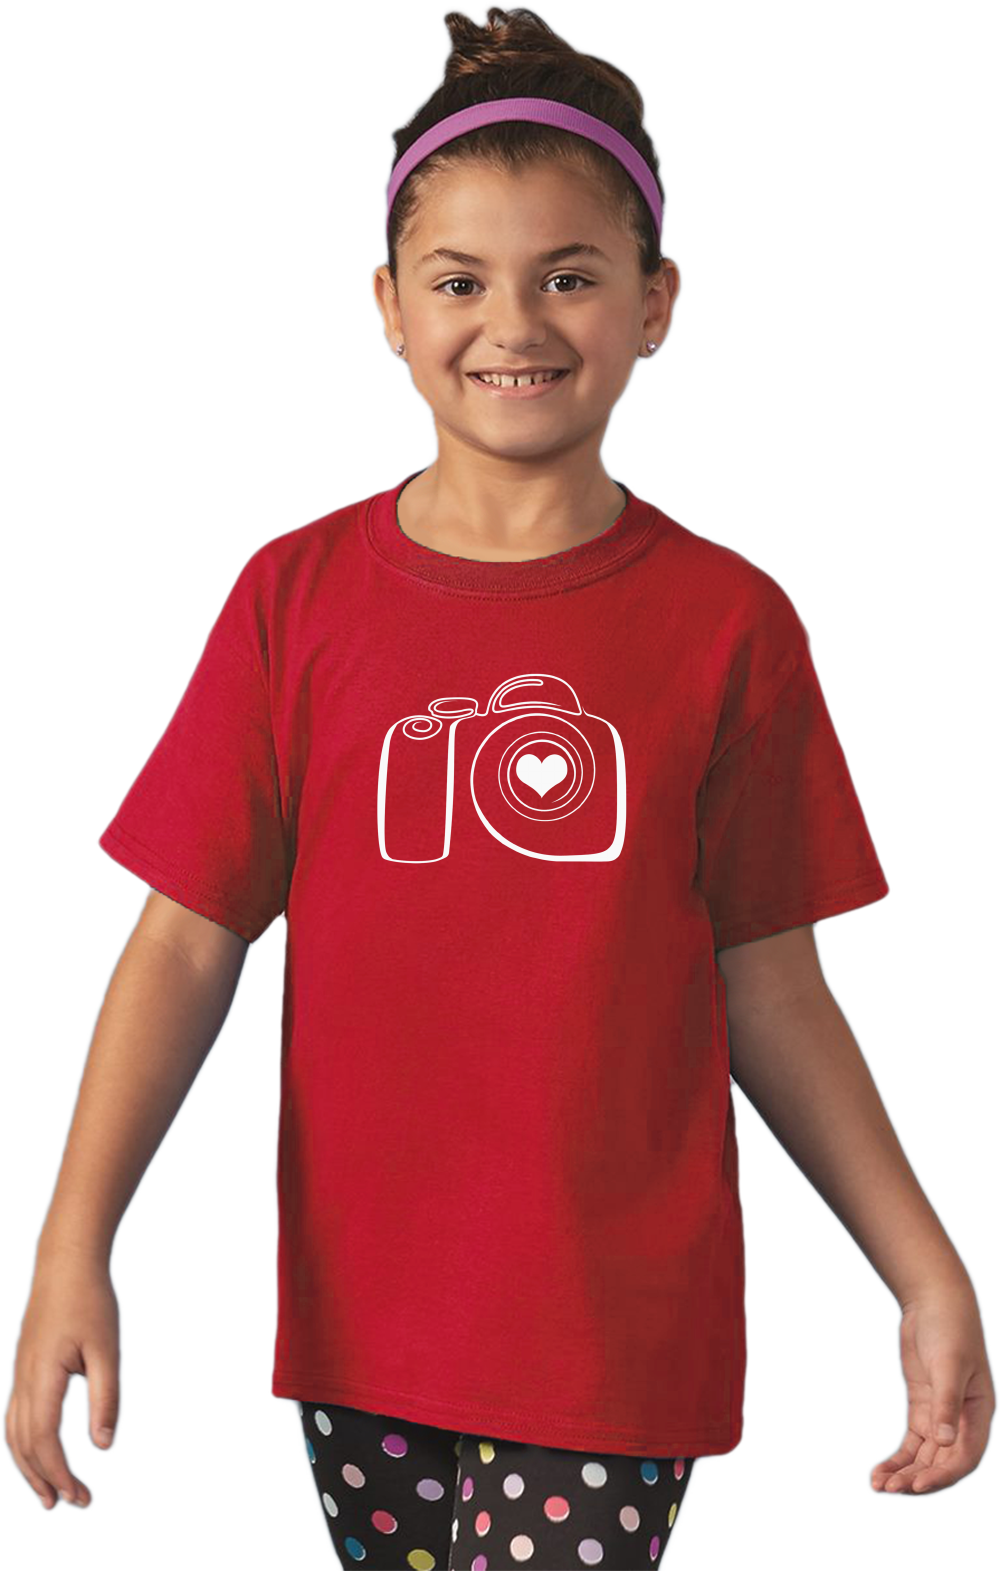 Youth Red PHOTOGRAPHY LOVE T-shirt